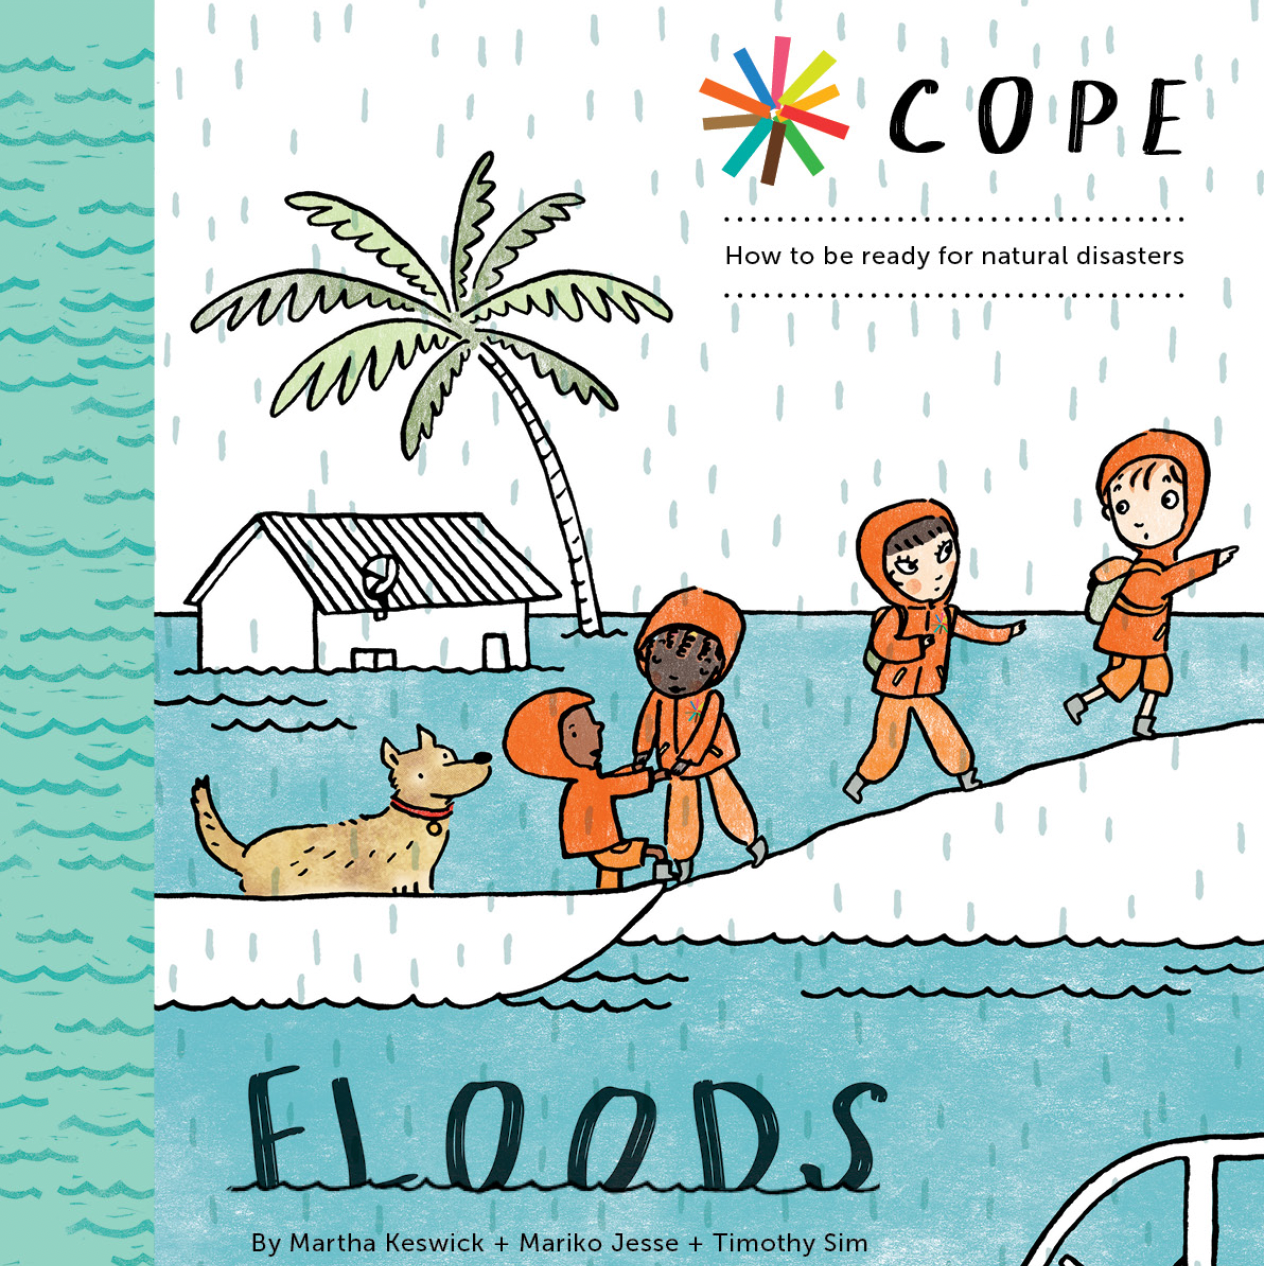 Cover of the Floods book